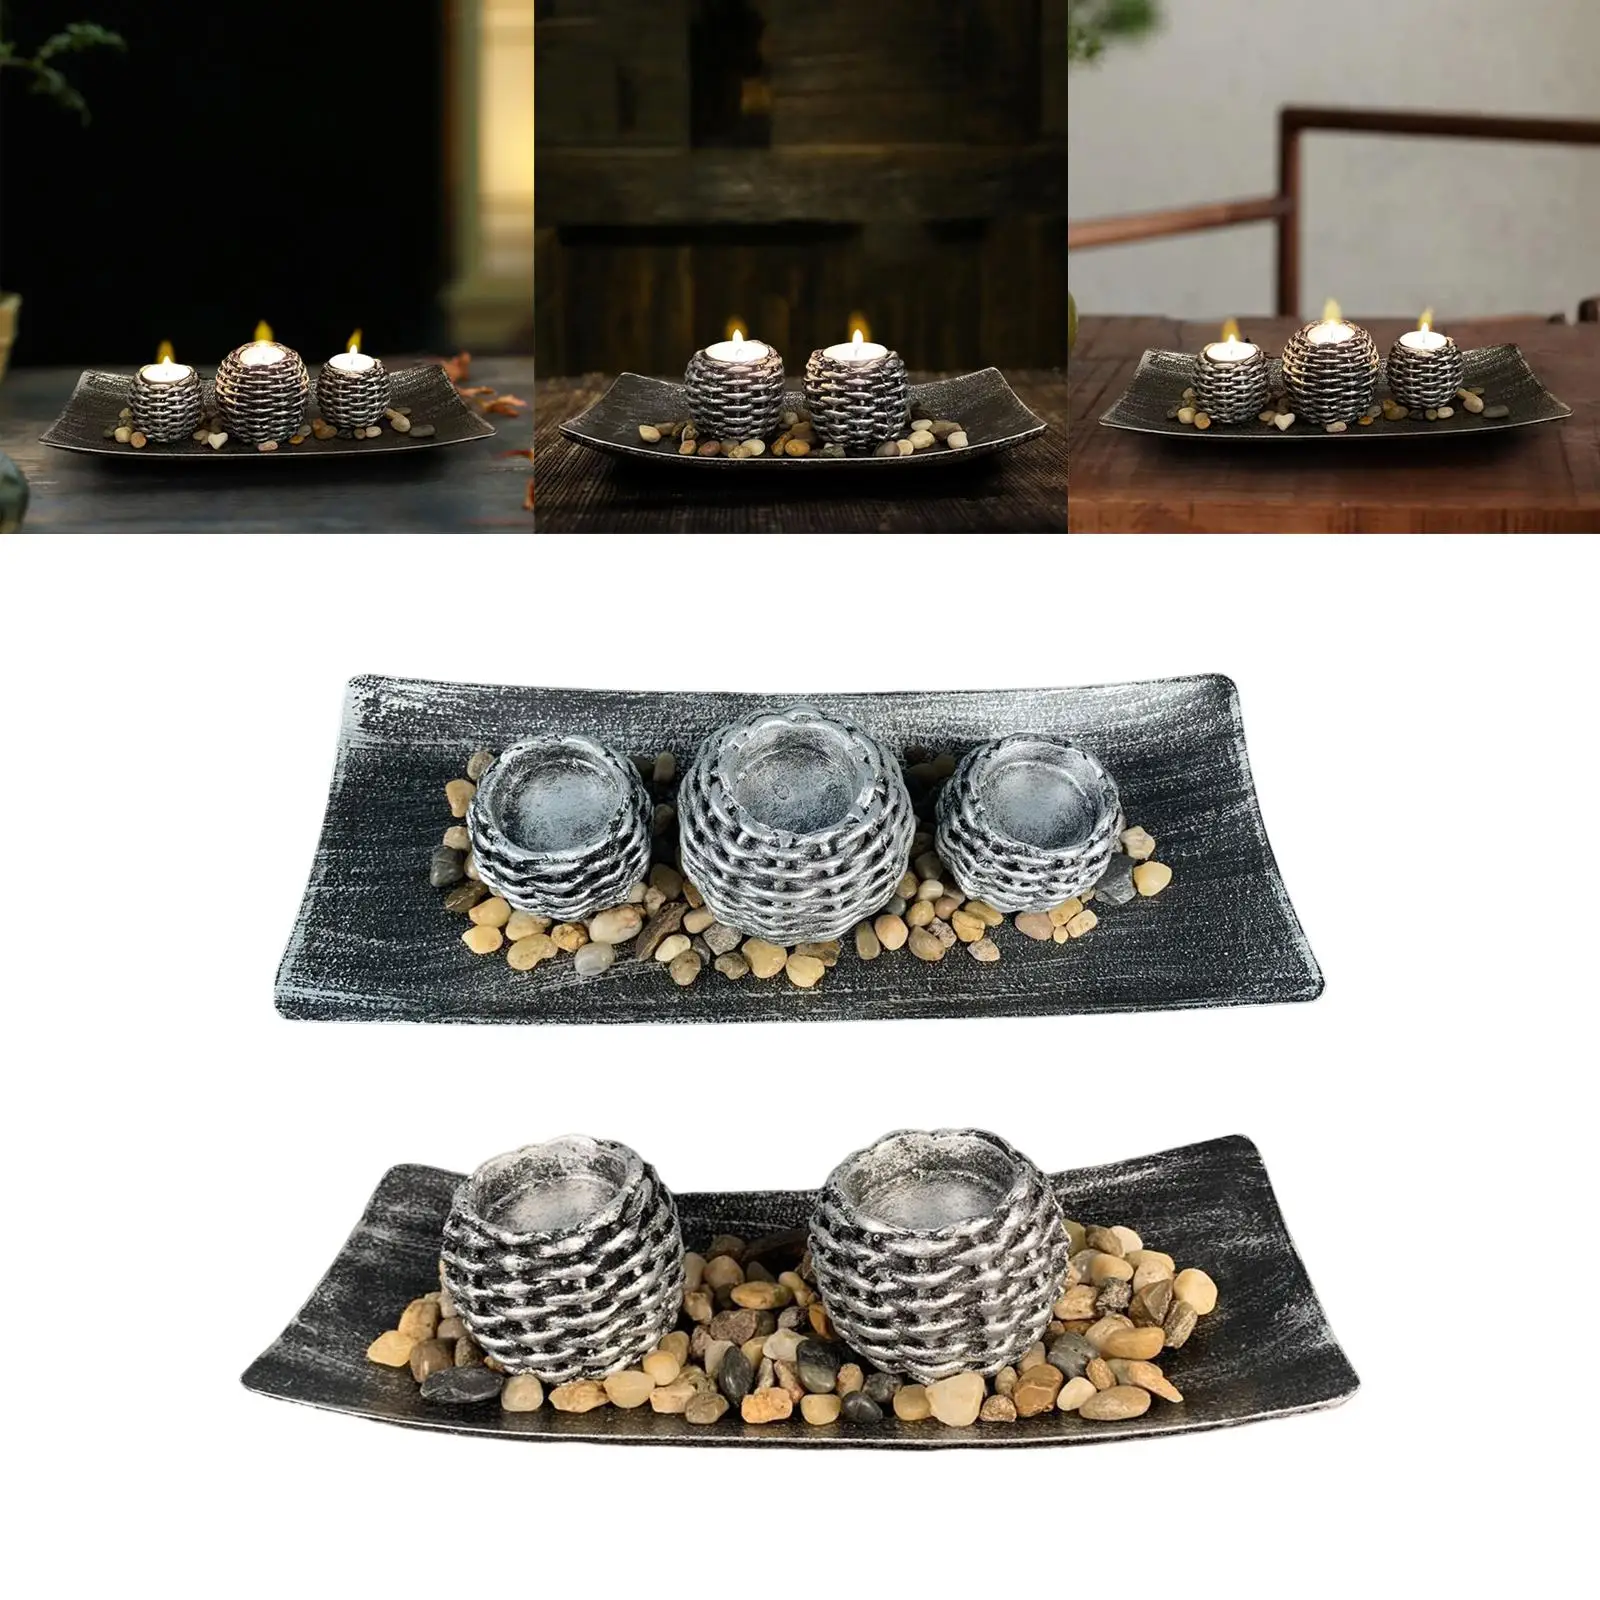 W/ Cups Rattan Design Candle Holder Resin Candlestick Resin Crafts Home Furnishing Easy Use Candle Holder Set for Hotel Ornament